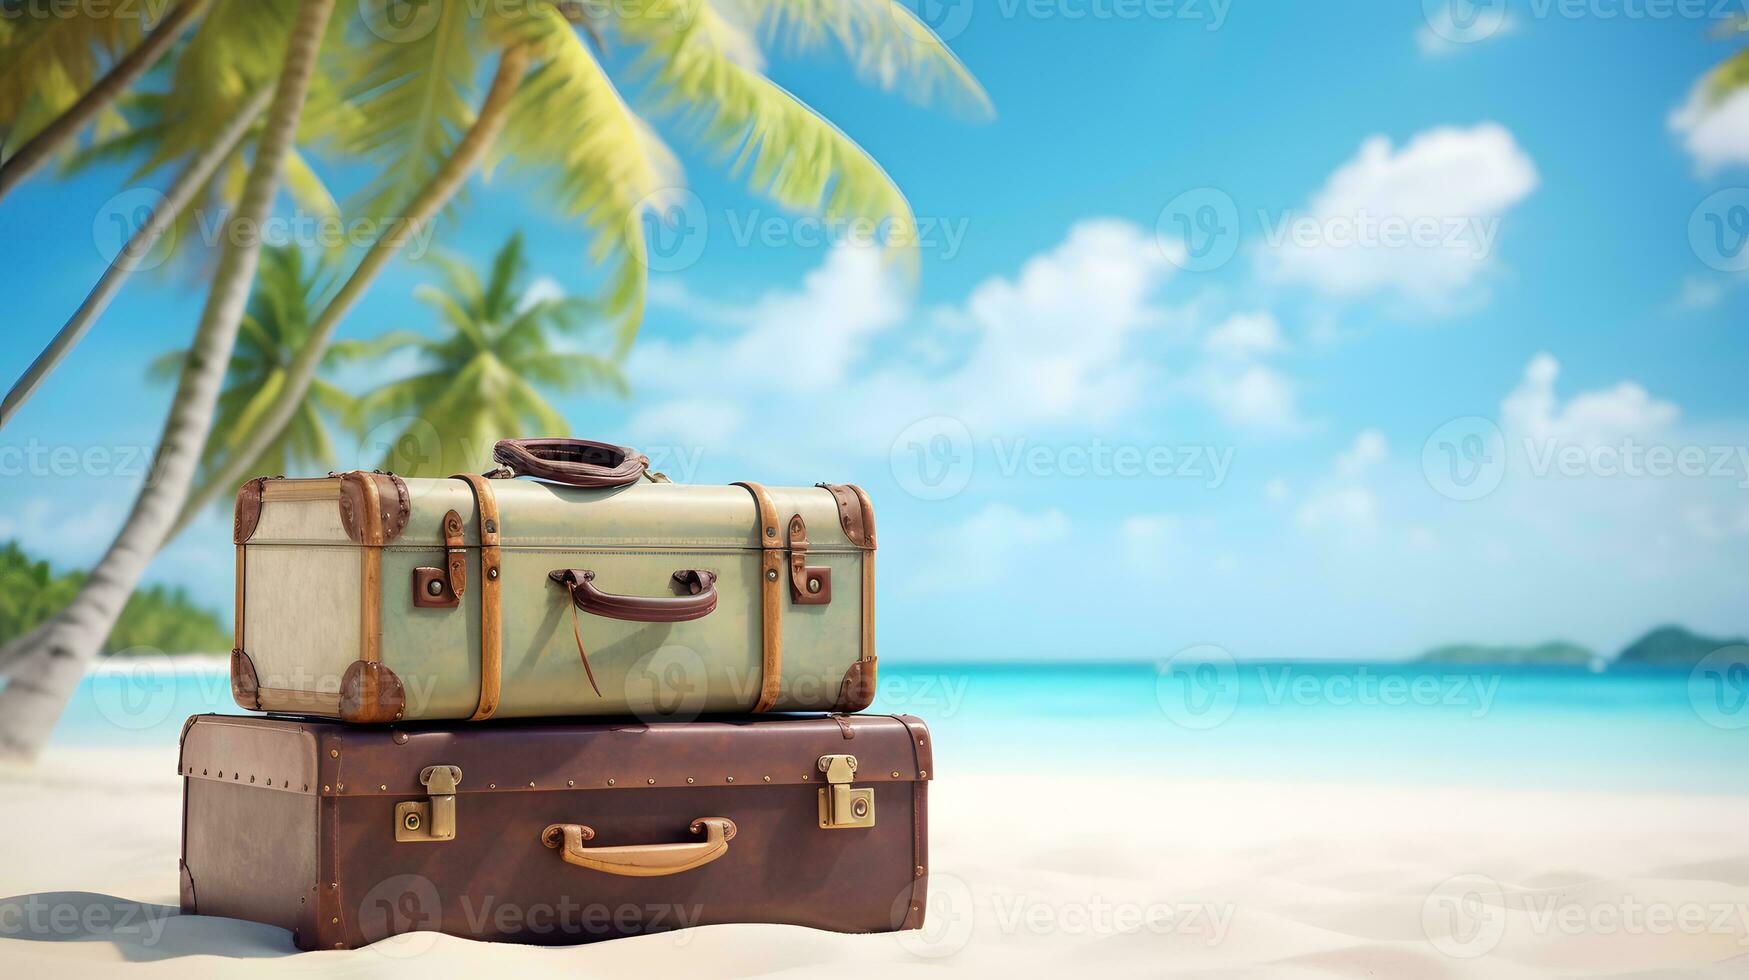 Vintage suitcases on tropical beach background. photo